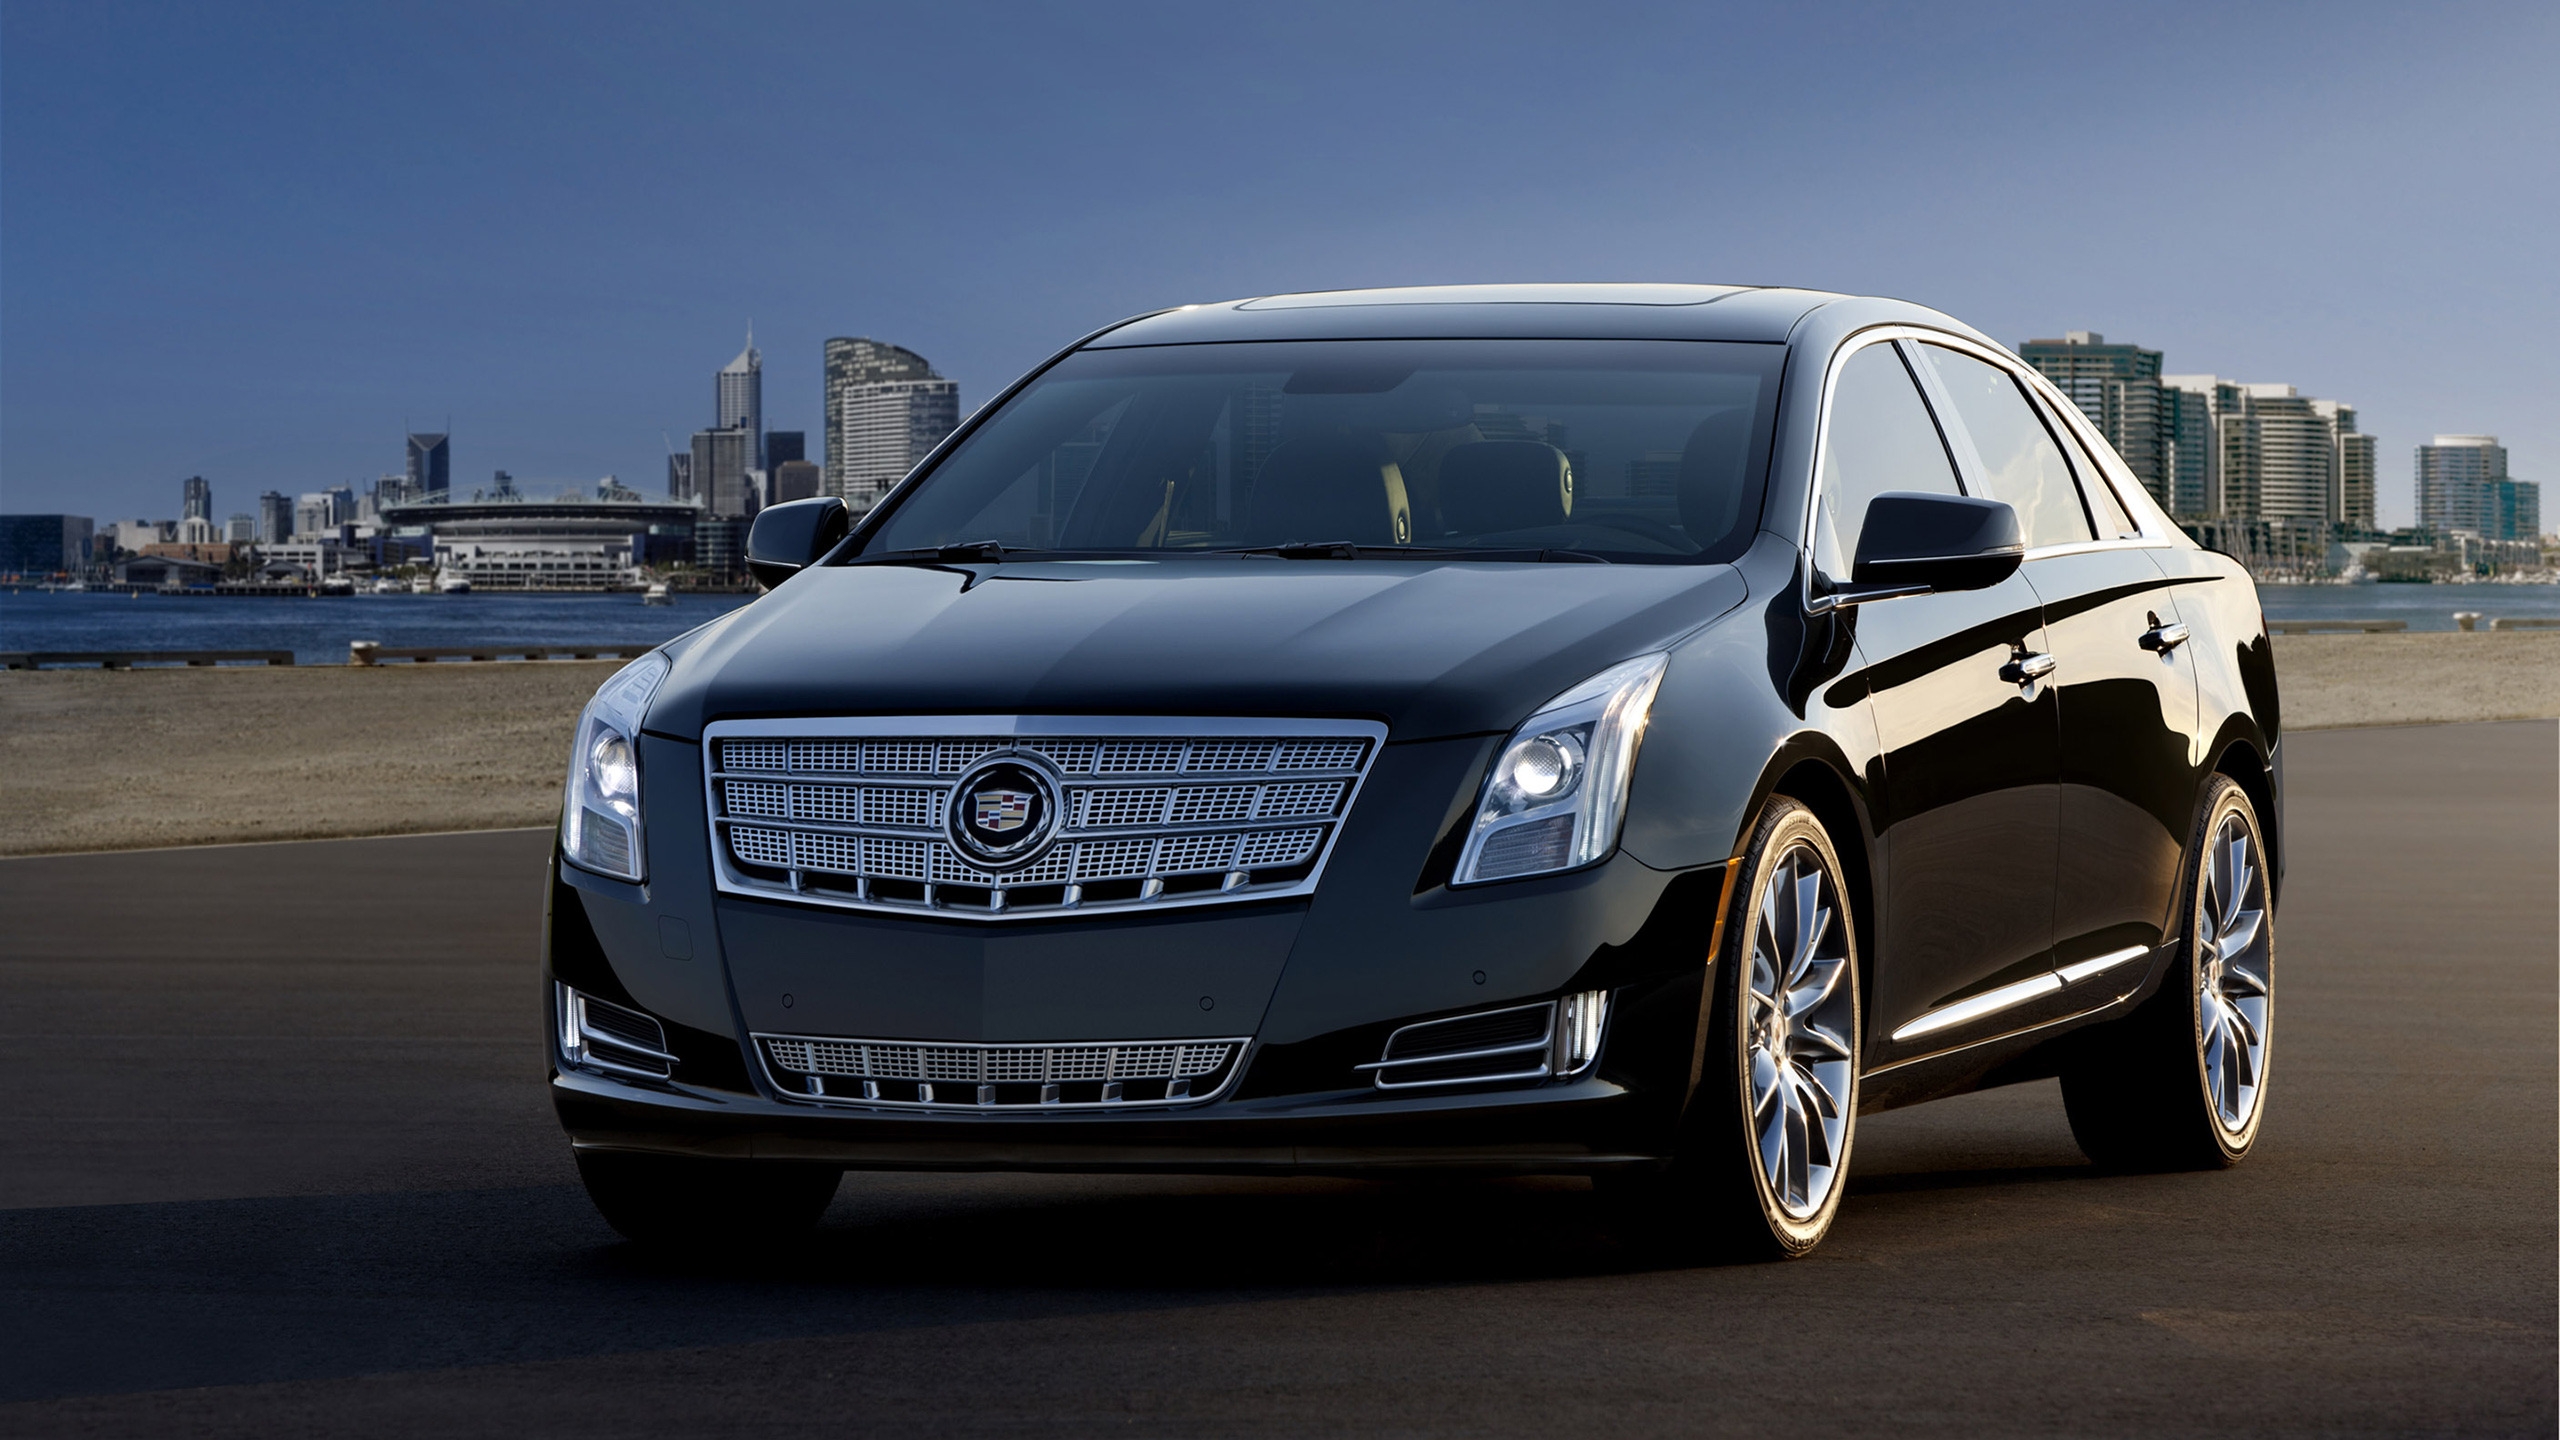 Cadillac XTS 2013 Edition for 2560x1440 HDTV resolution